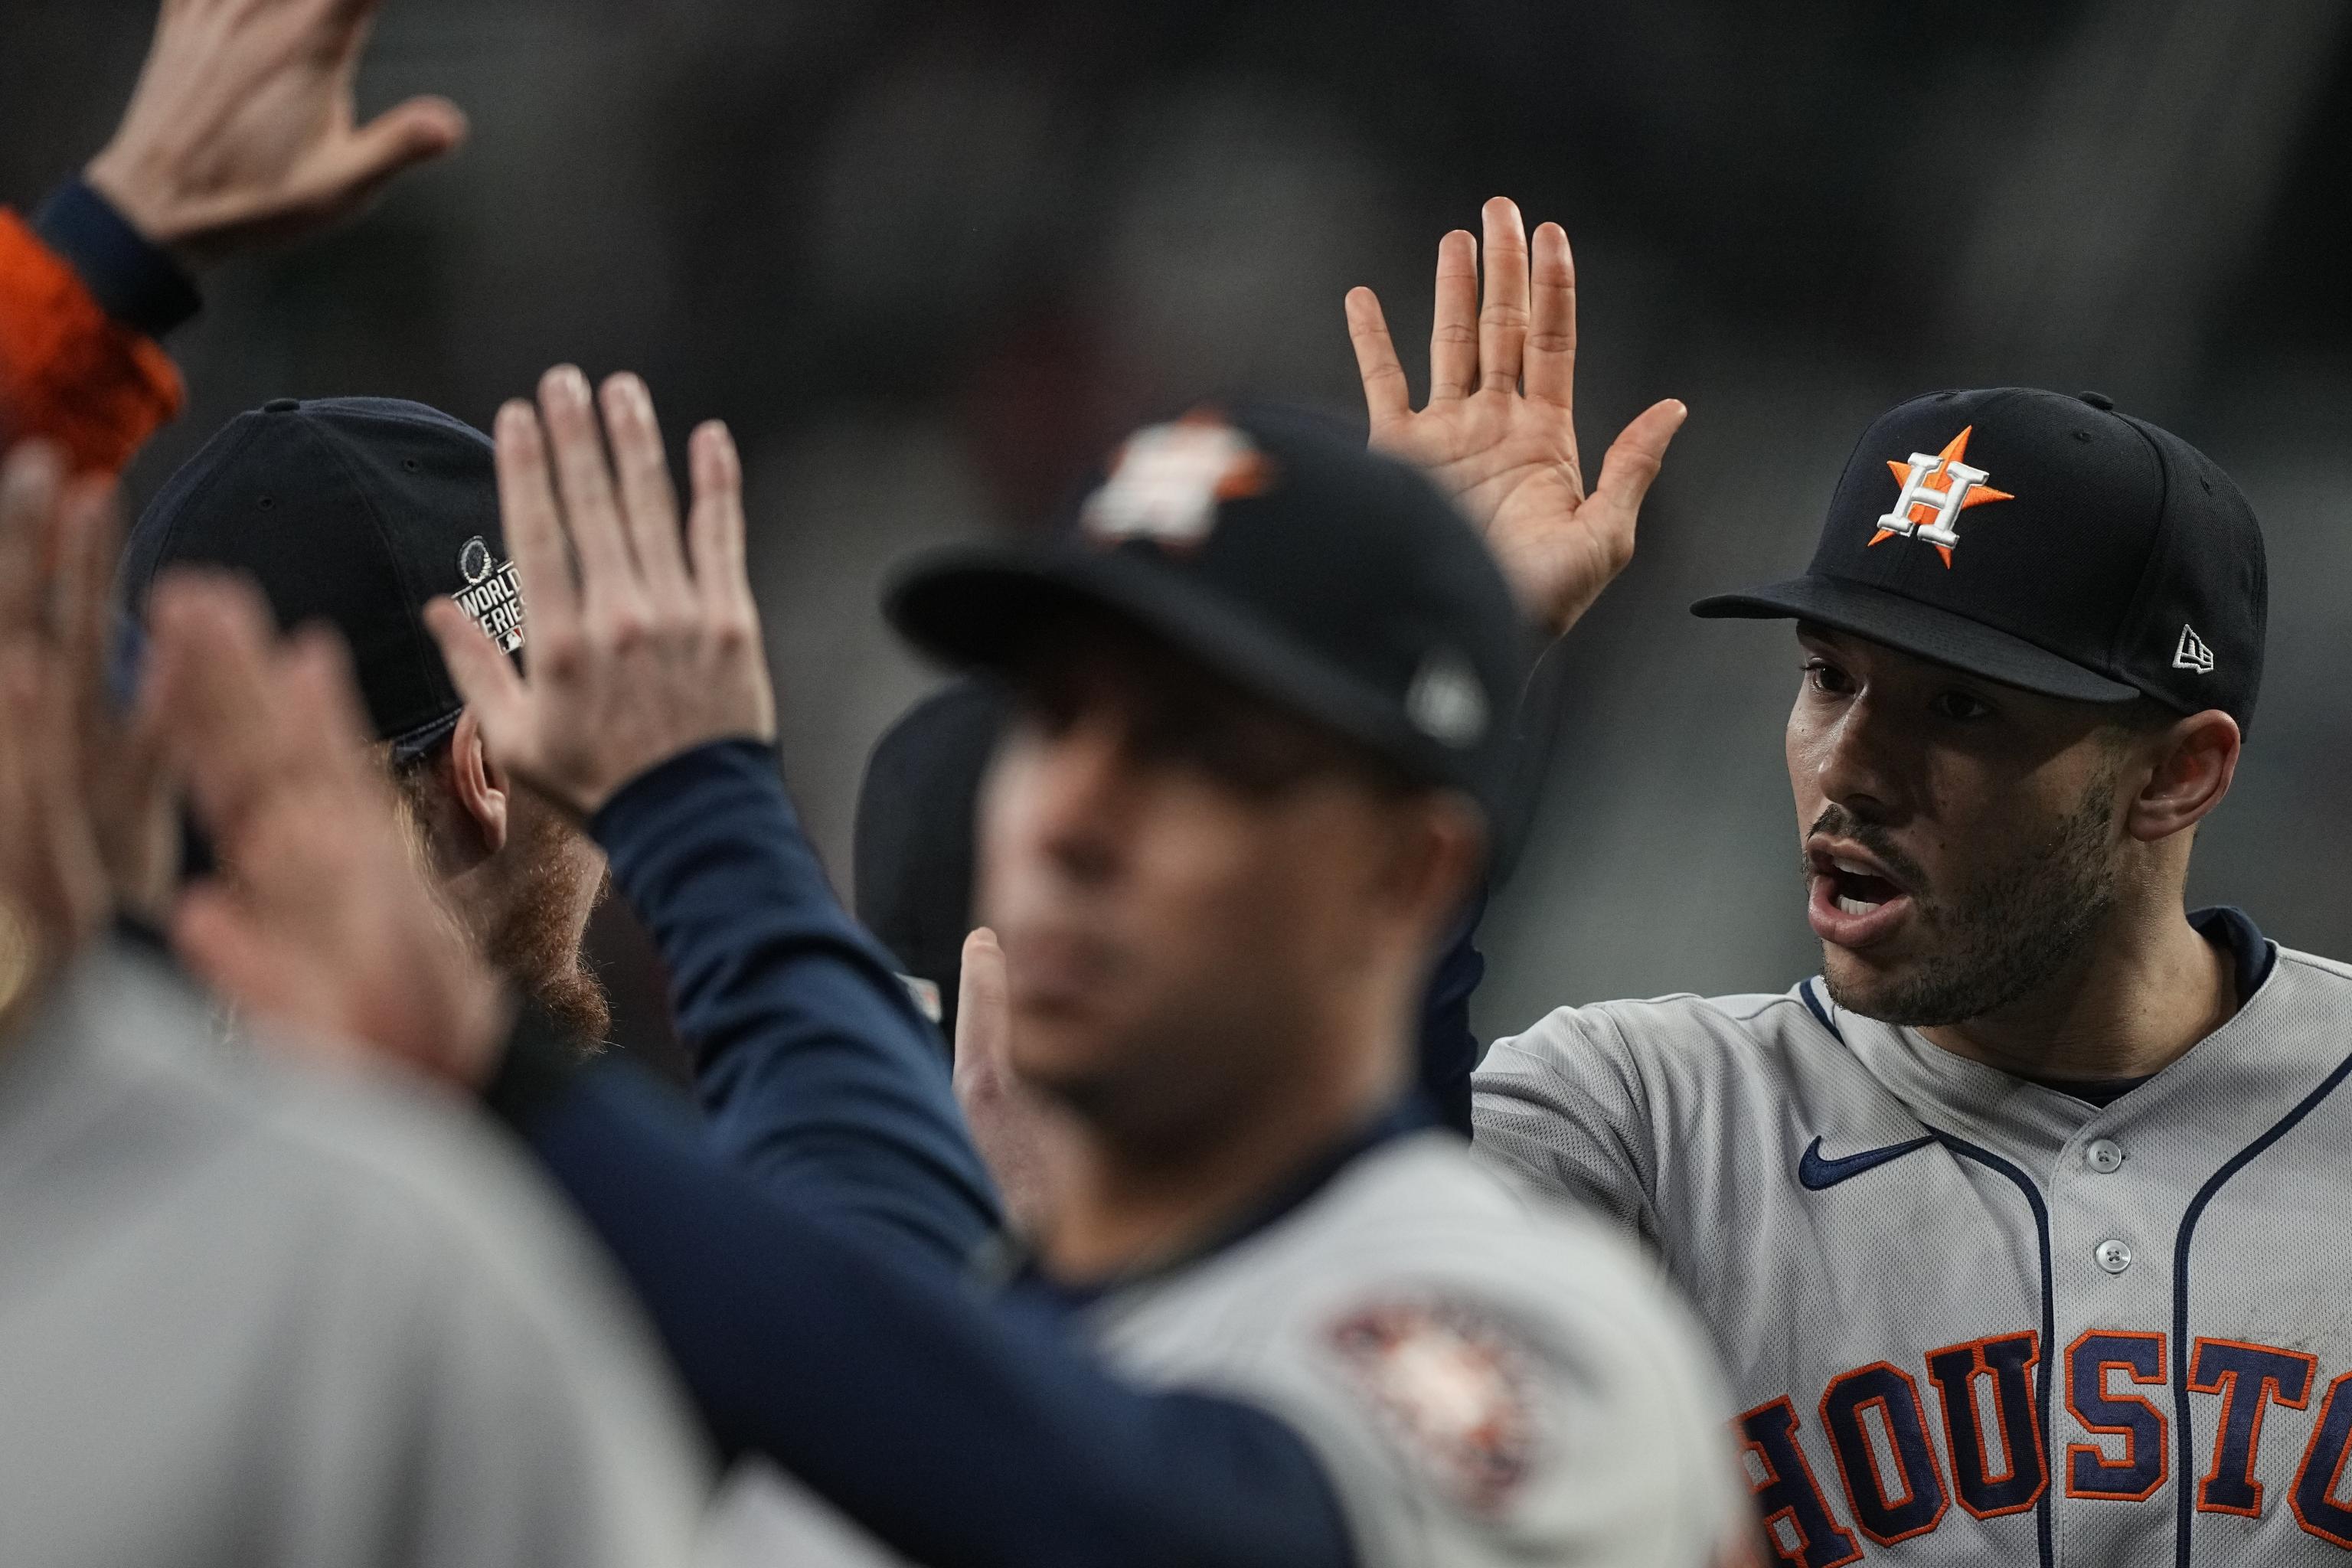 Houston Astros - Five straight wins for Luis! #ForTheH